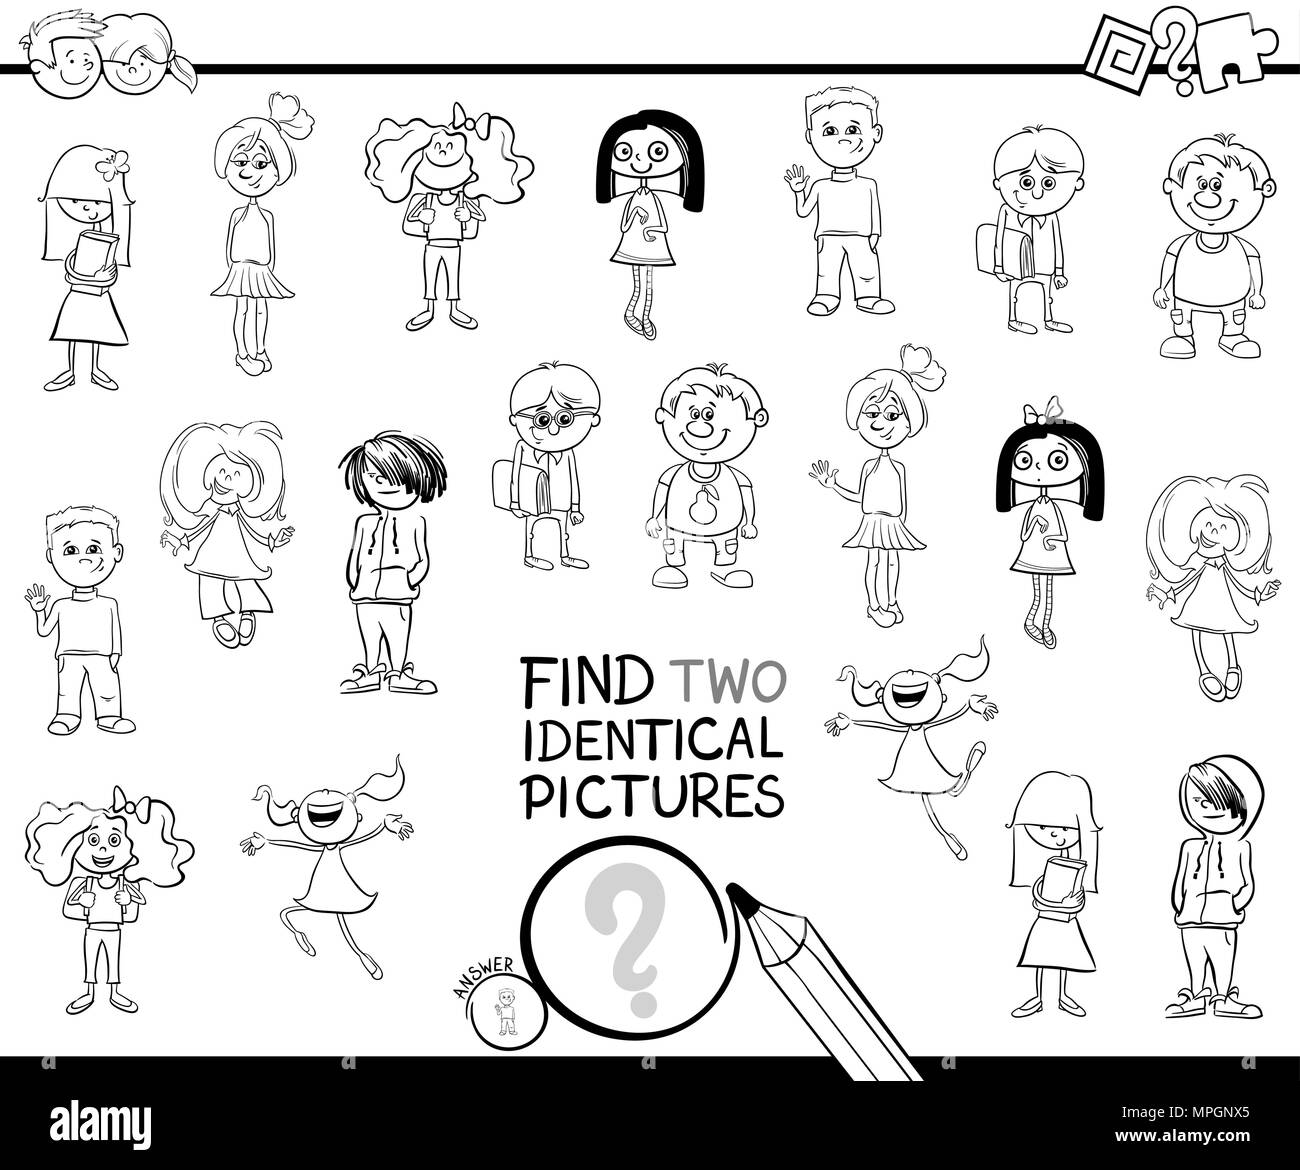 Black and White Cartoon Illustration of Finding Two Identical Pictures Educational Game for Kids with Girls and Boys Children Characters Coloring Book Stock Vector